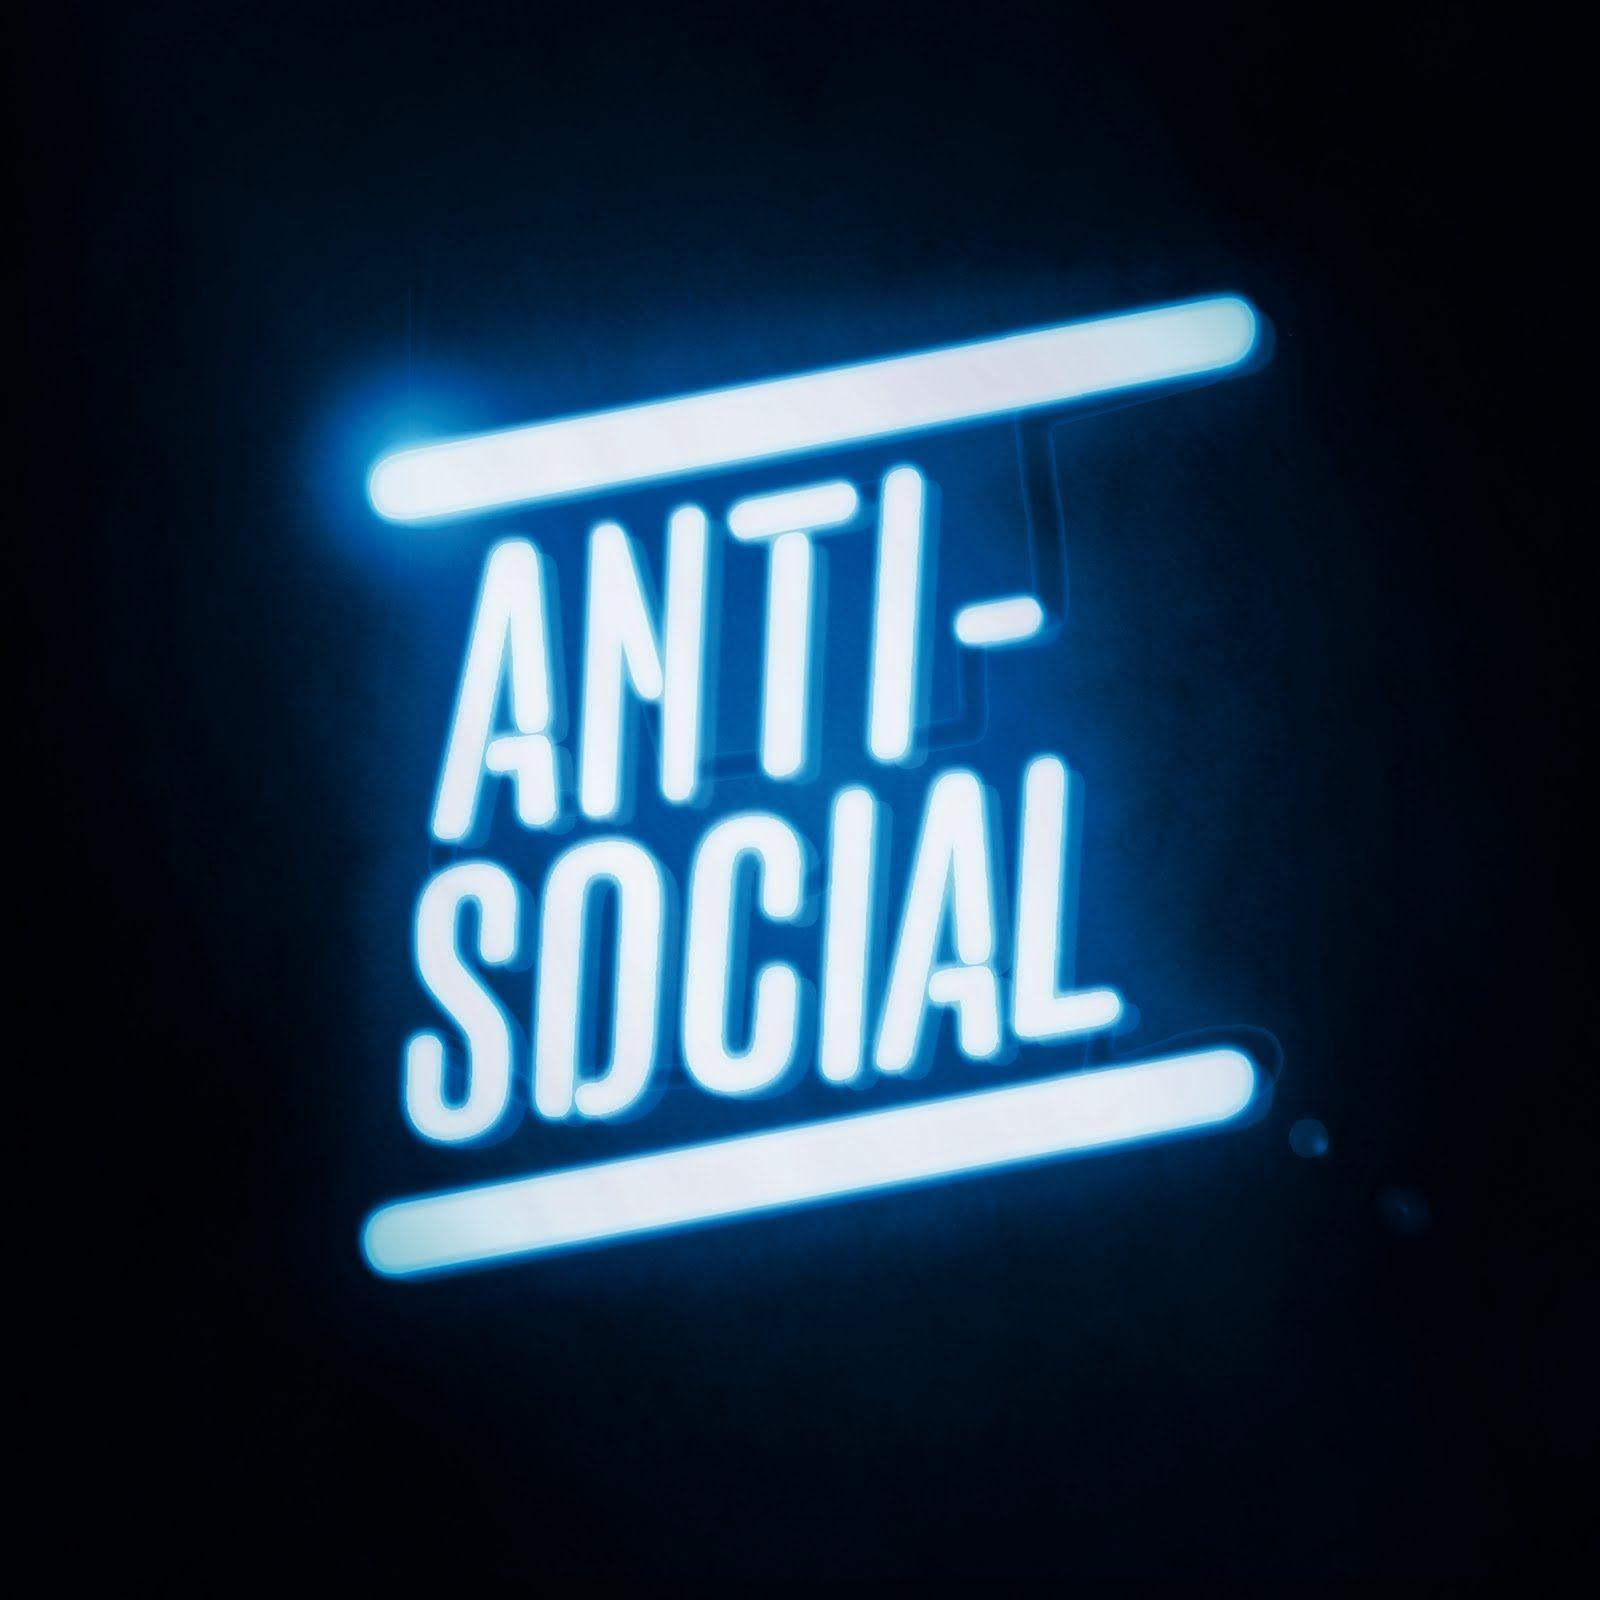 anti social club wallpaper APK for Android Download